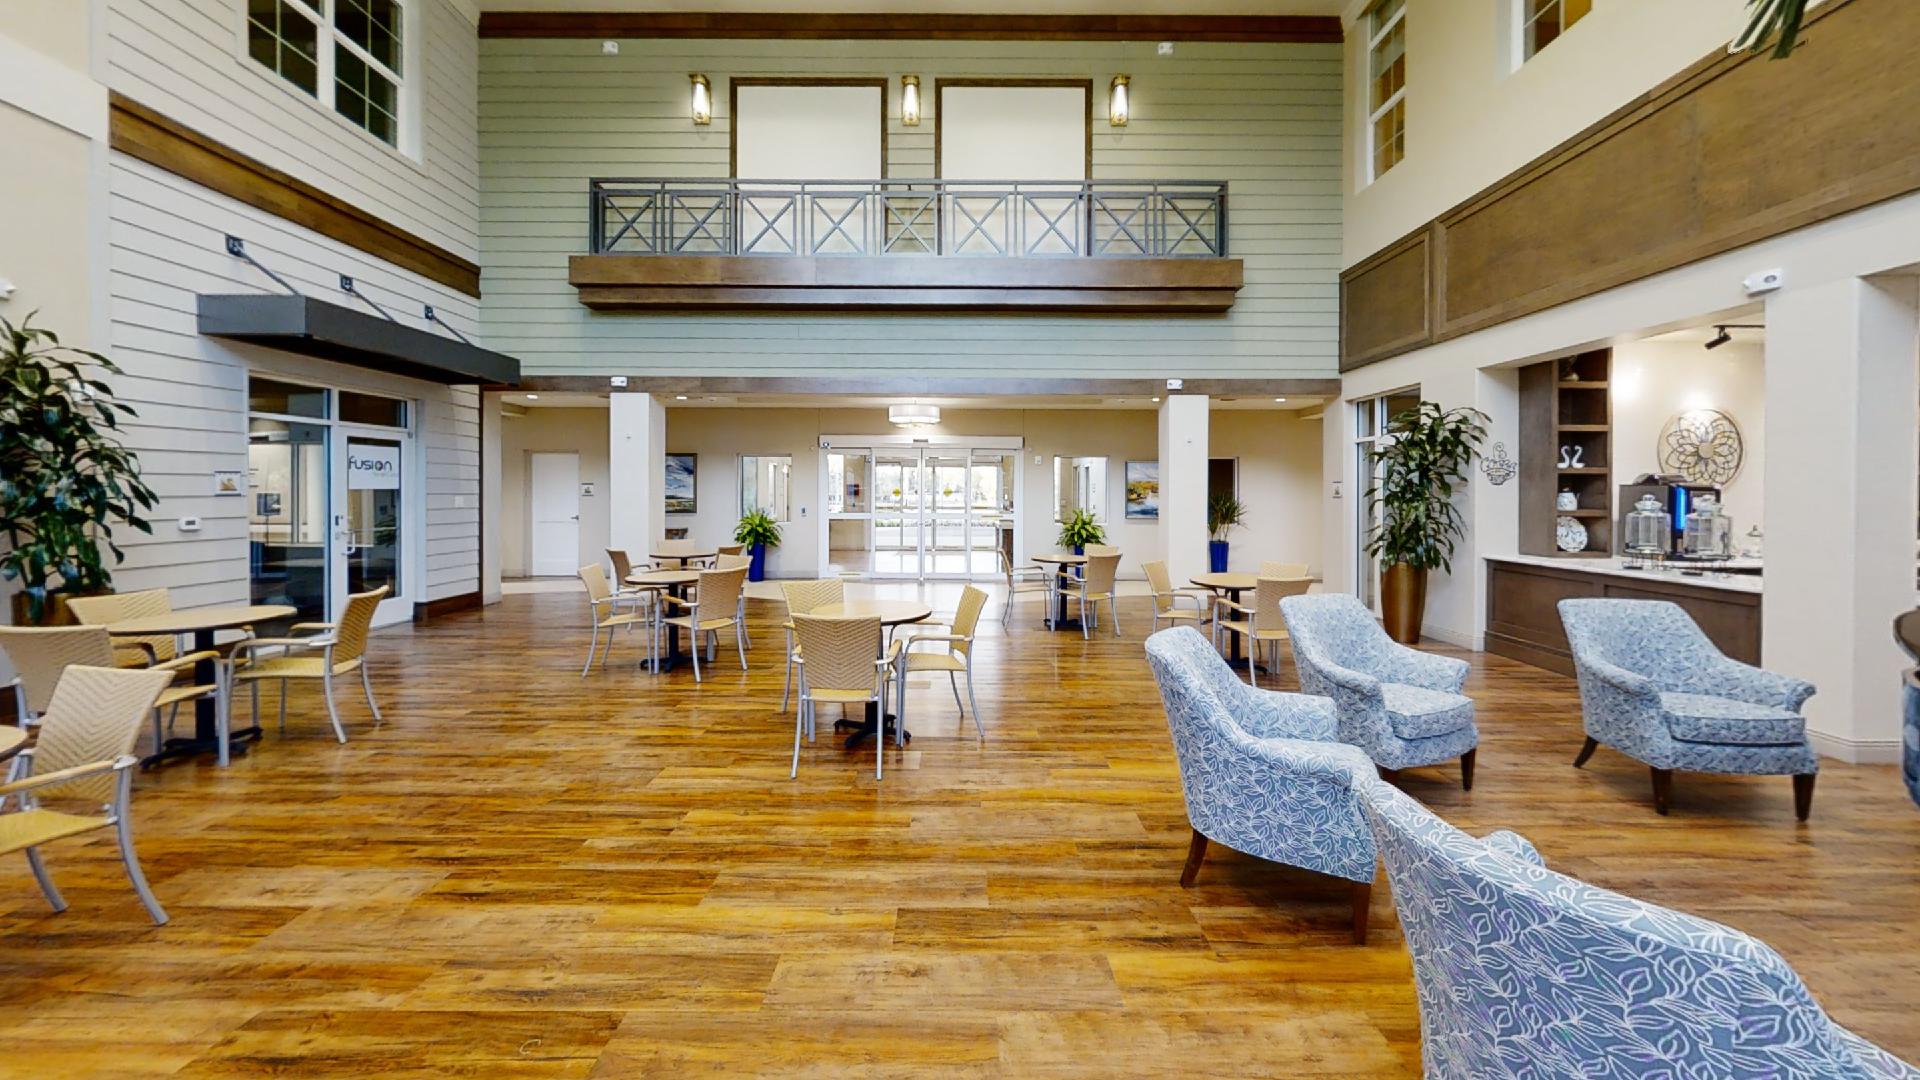 Aravilla Clearwater Memory Care Community - Lobby